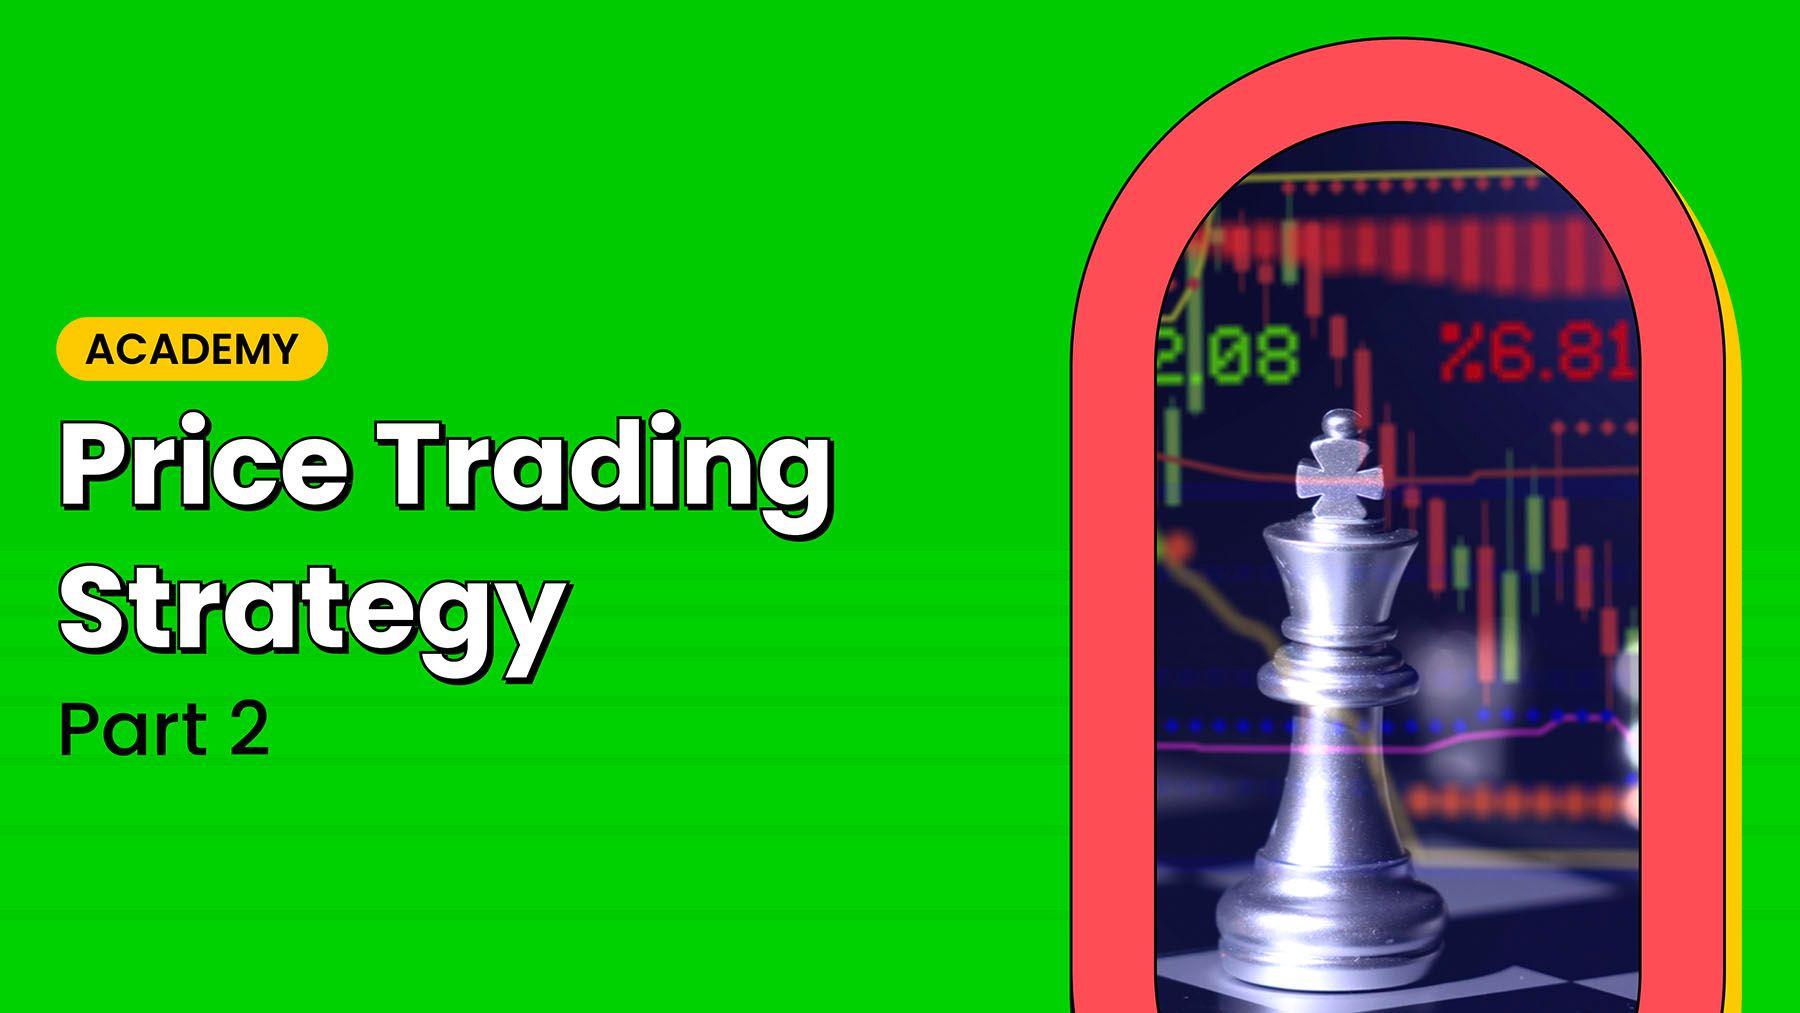 What-To-Know-About-Price-Action-Trading-In-Forex-Part-2-36PH0.png